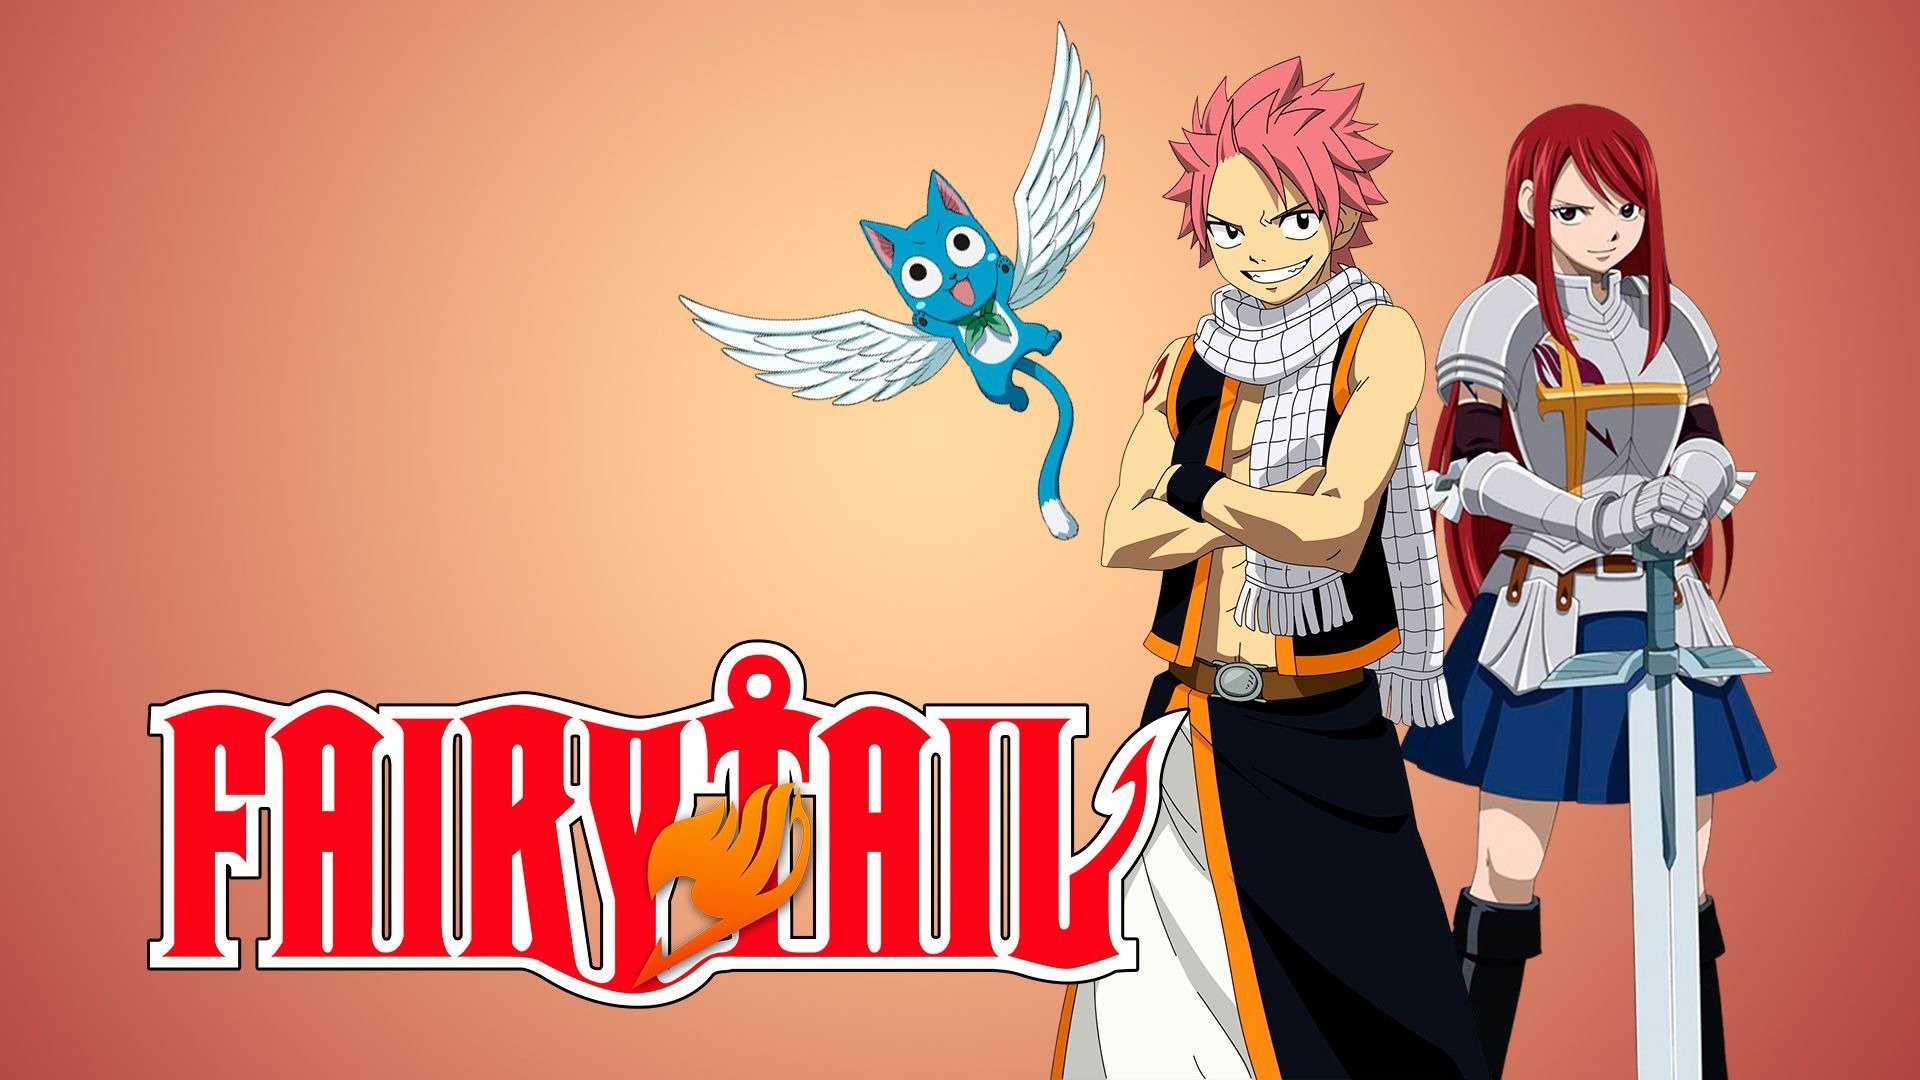 70+ Anime Fairy Tail Wallpapers HD (2020) - Page 5 of 6 - We 7